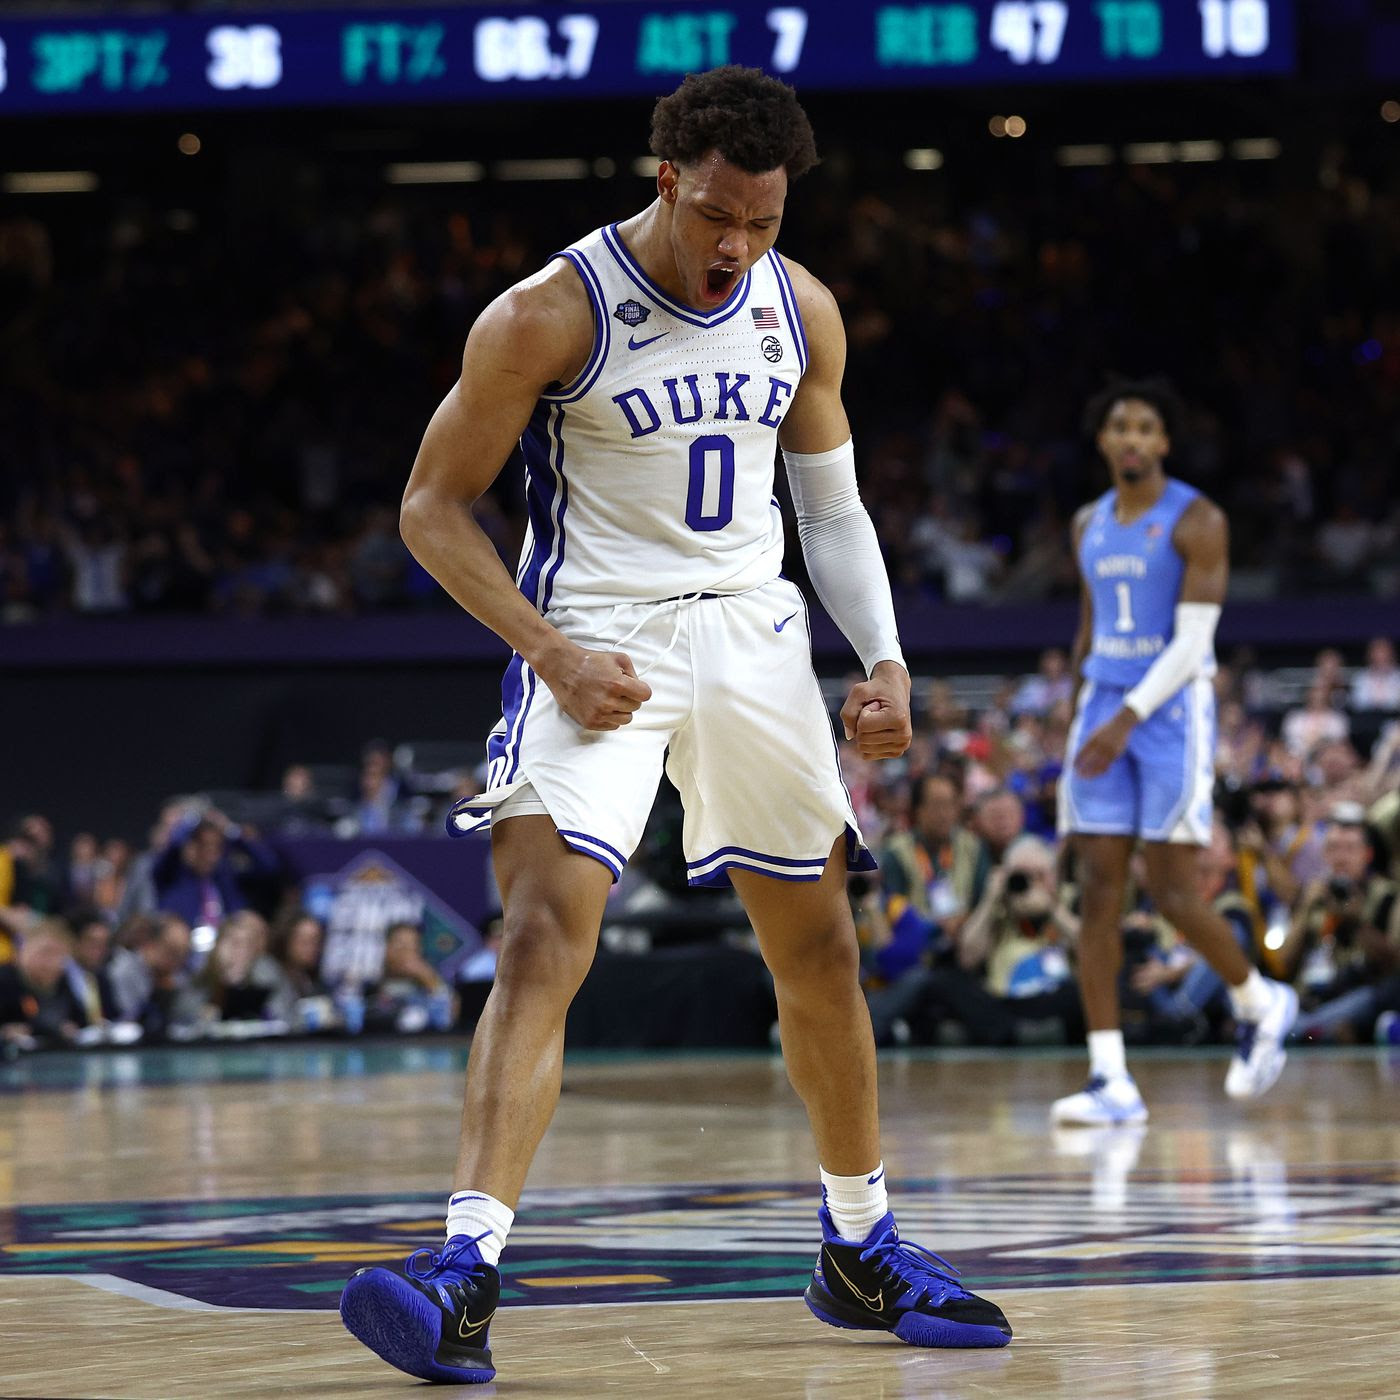 Minnesota Timberwolves Trade Up For Duke Wing Wendell Moore Jr. At No. 26 Overall